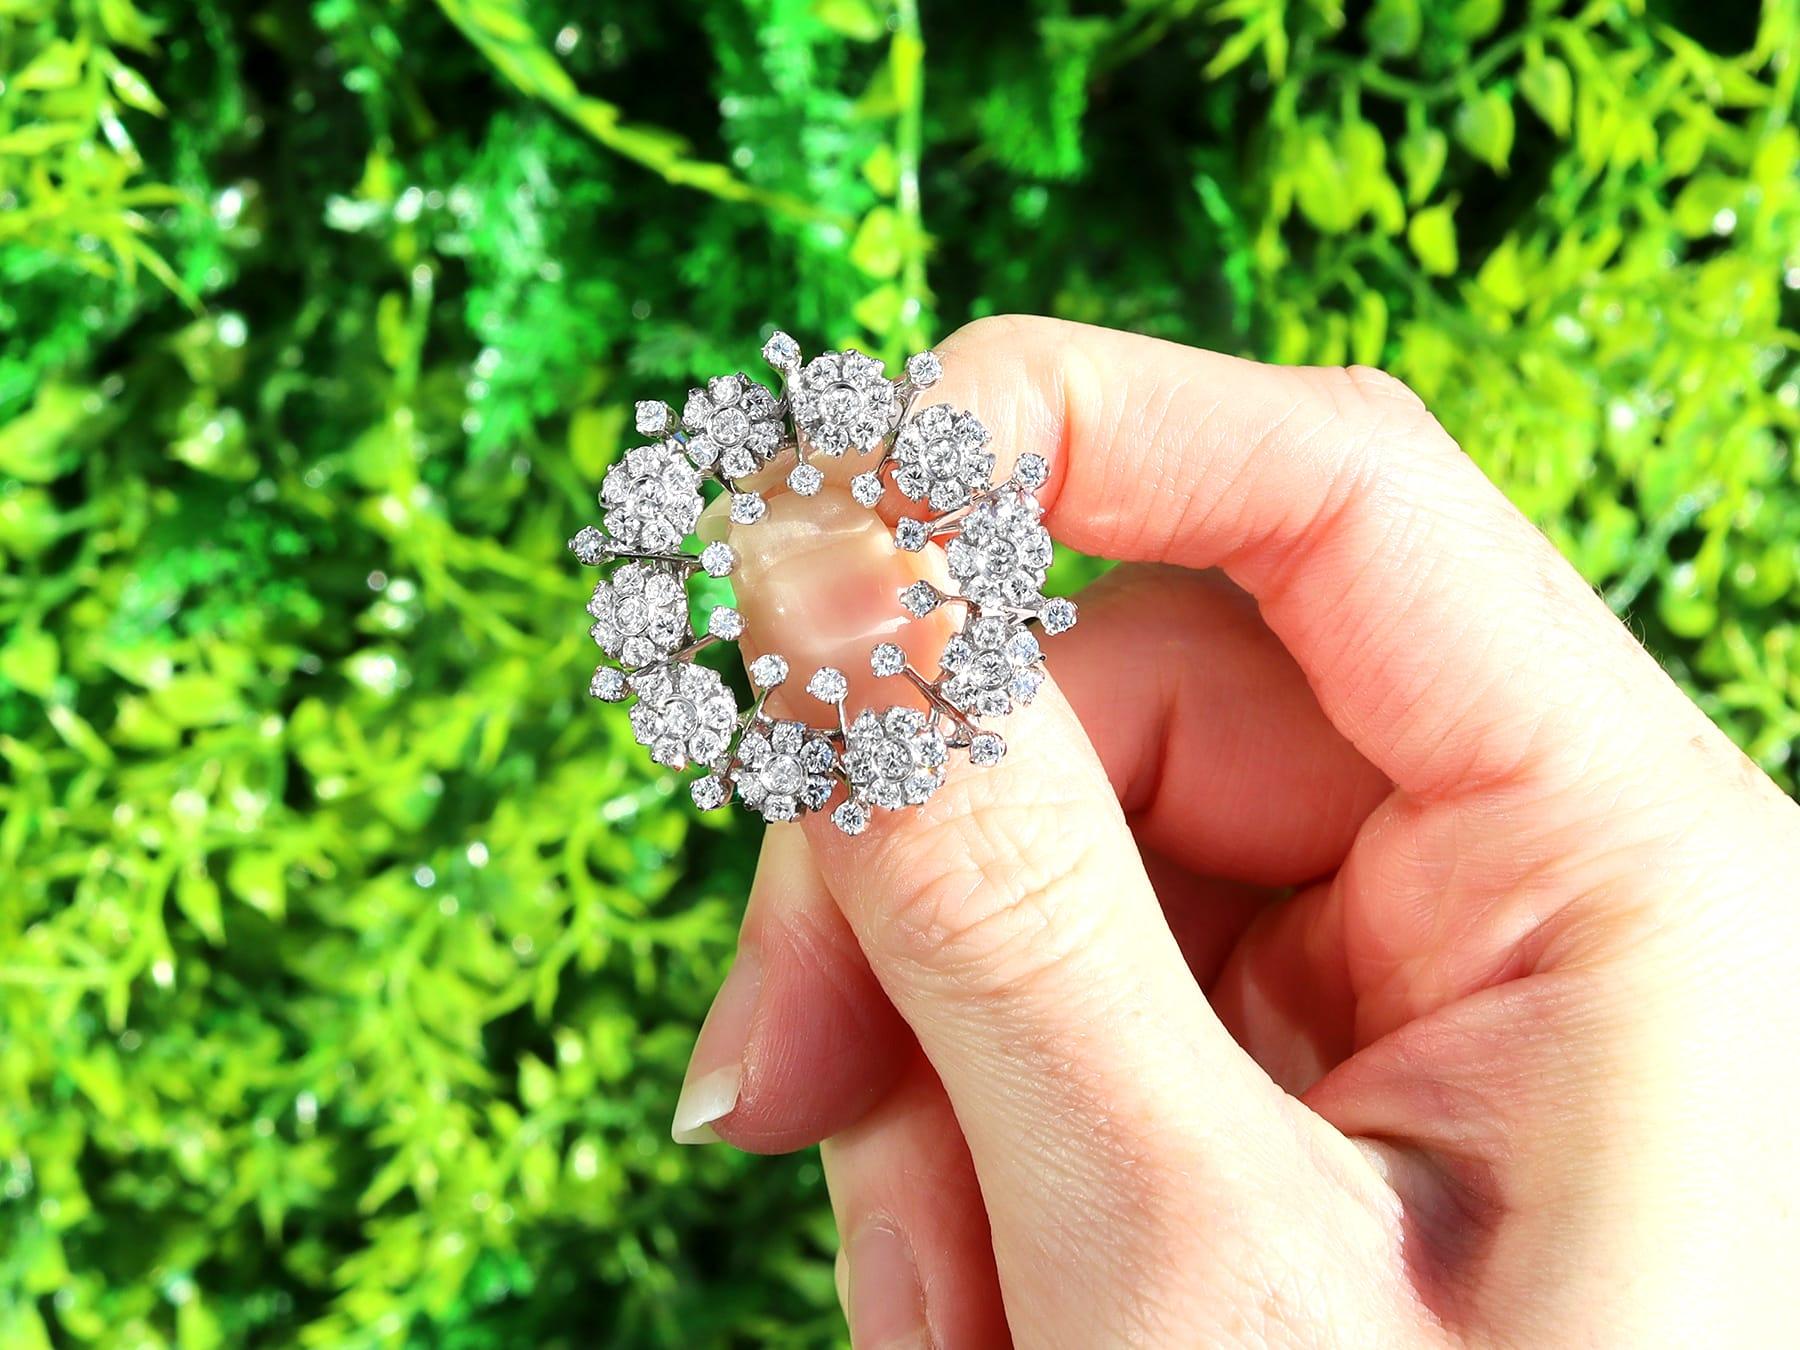 A stunning, fine and impressive vintage Italian 2.78 carat diamond and 18 carat white gold brooch; part of our vintage jewellery collections.

This stunning, fine and impressive vintage diamond brooch has been crafted in 18ct white gold.

The